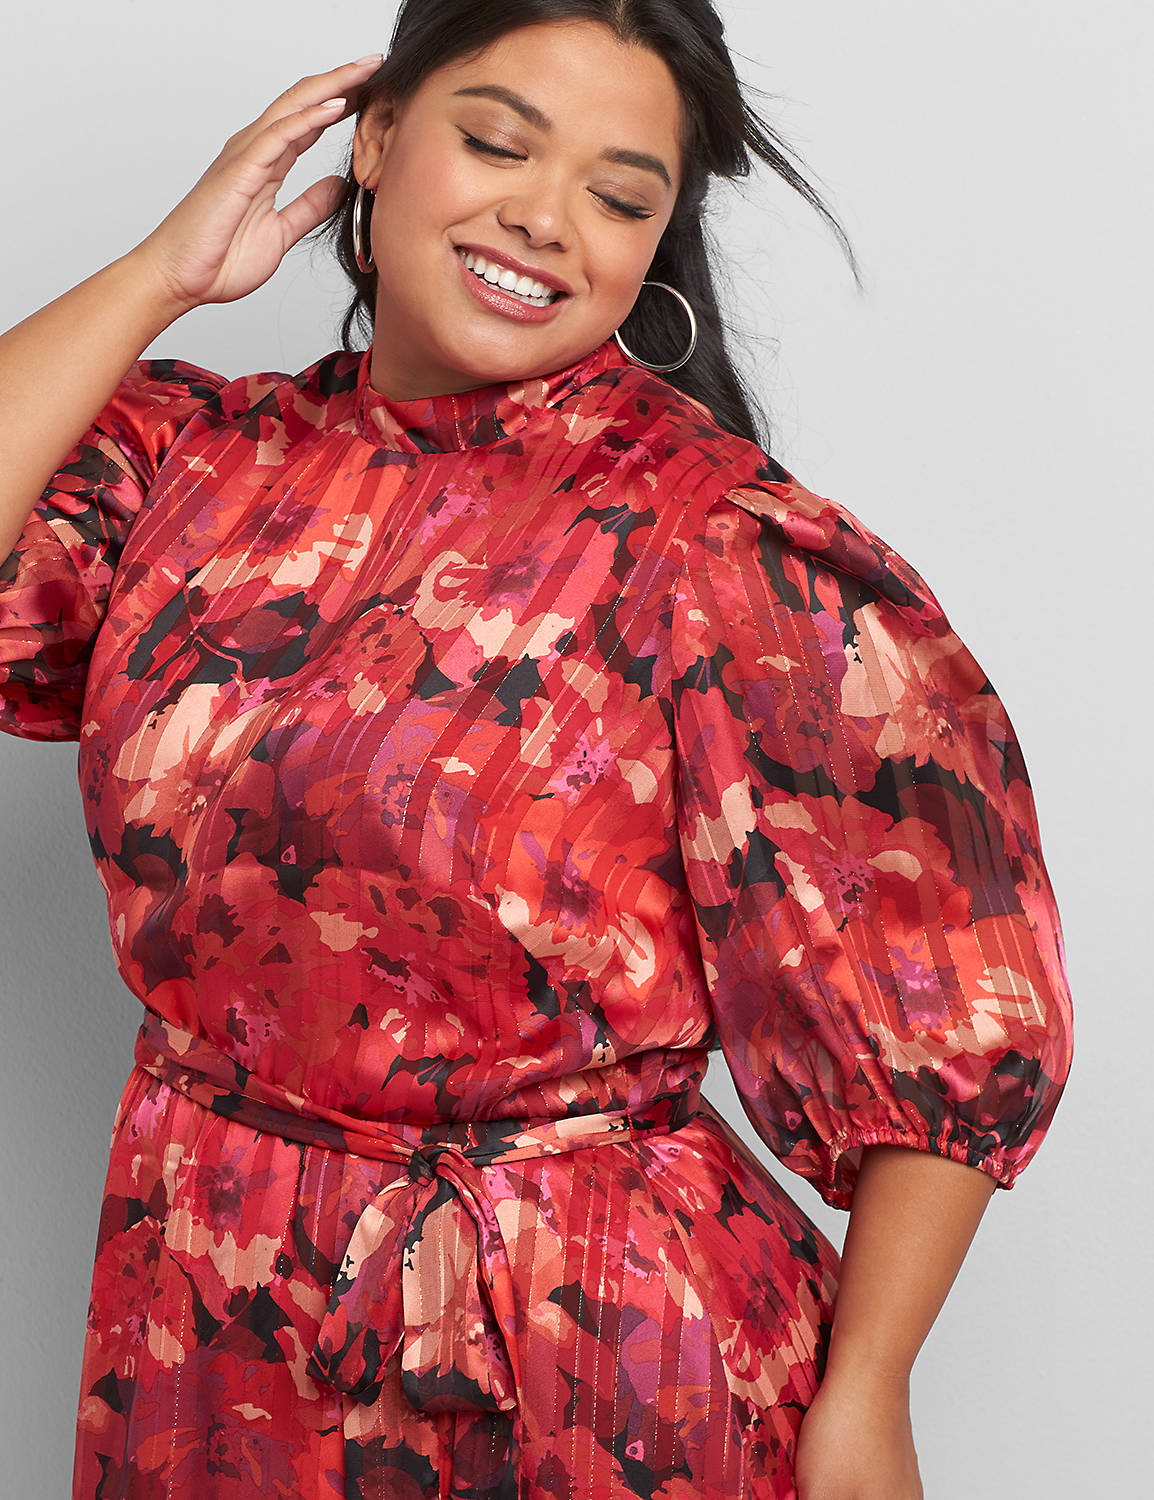 LONG SLEEVE STANDARD COLLAR ALL OVER SHADOW STRIPE FLORAL WITH BELT DRESS 1118237:GABBY SKYE RED PINK FLORAL- AS HEADER: Product Image 3